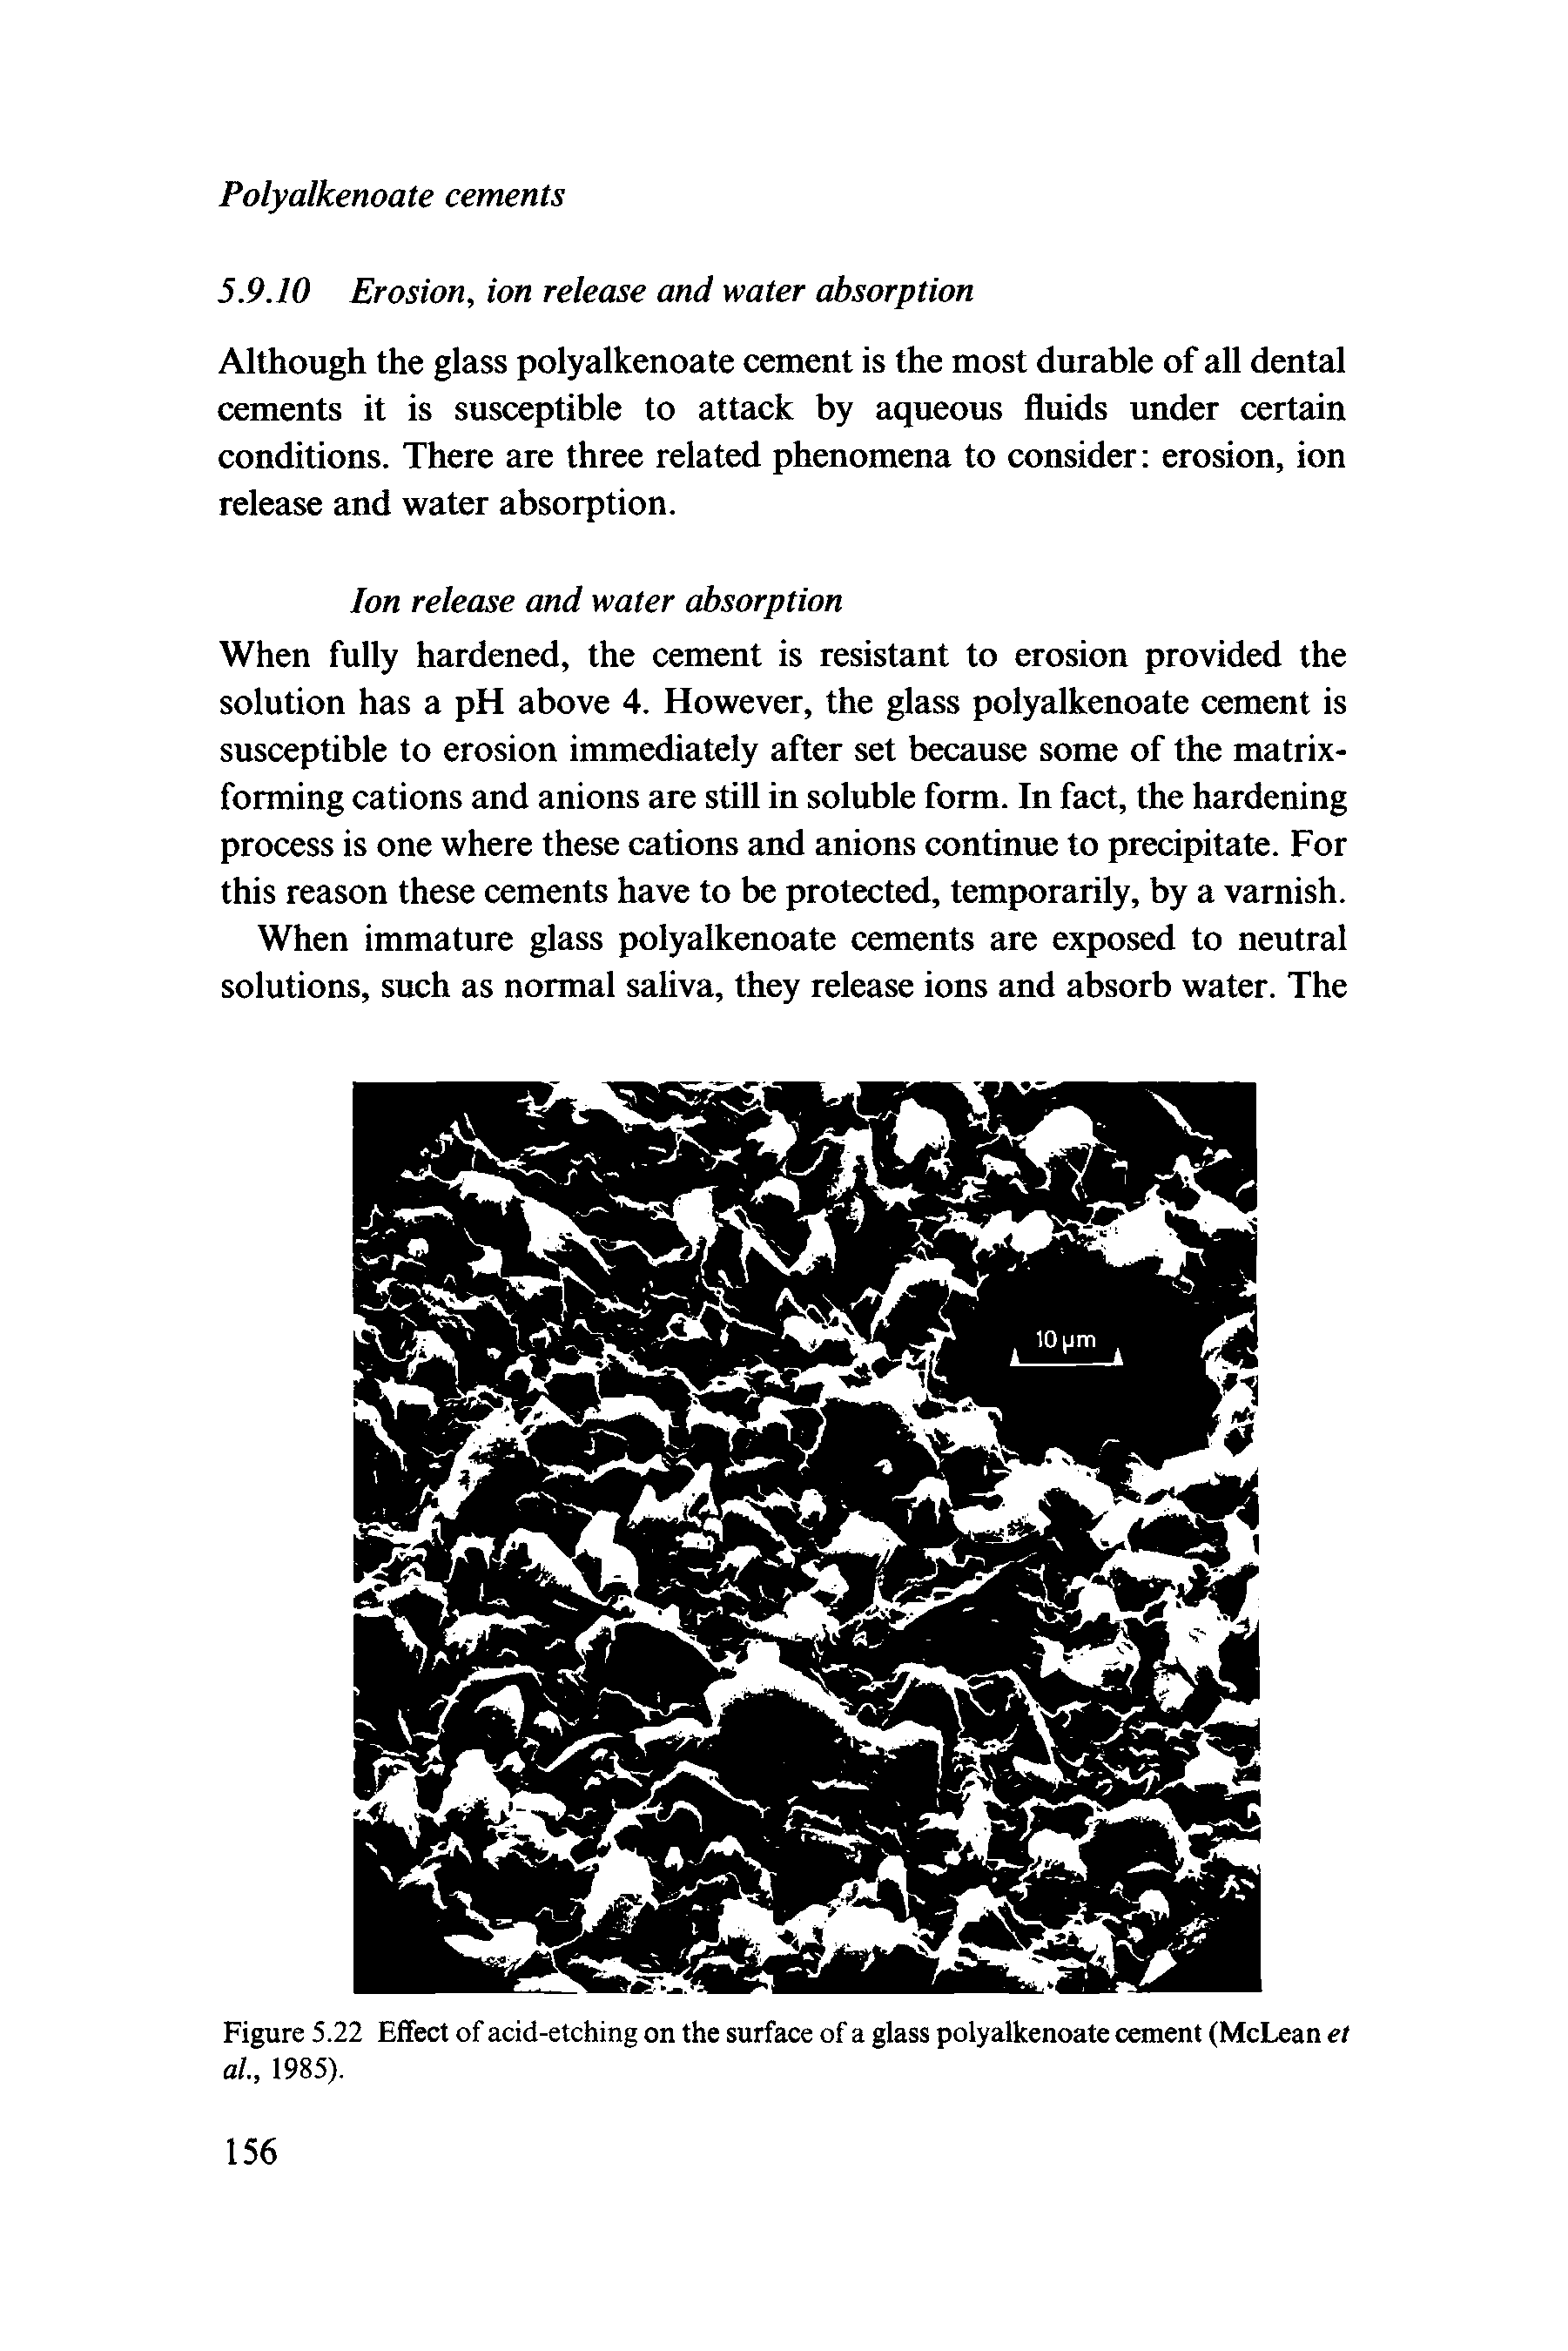 Figure 5.22 Effect of acid-etching on the surface of a glass polyalkenoate cement (McLean et al, 1985).